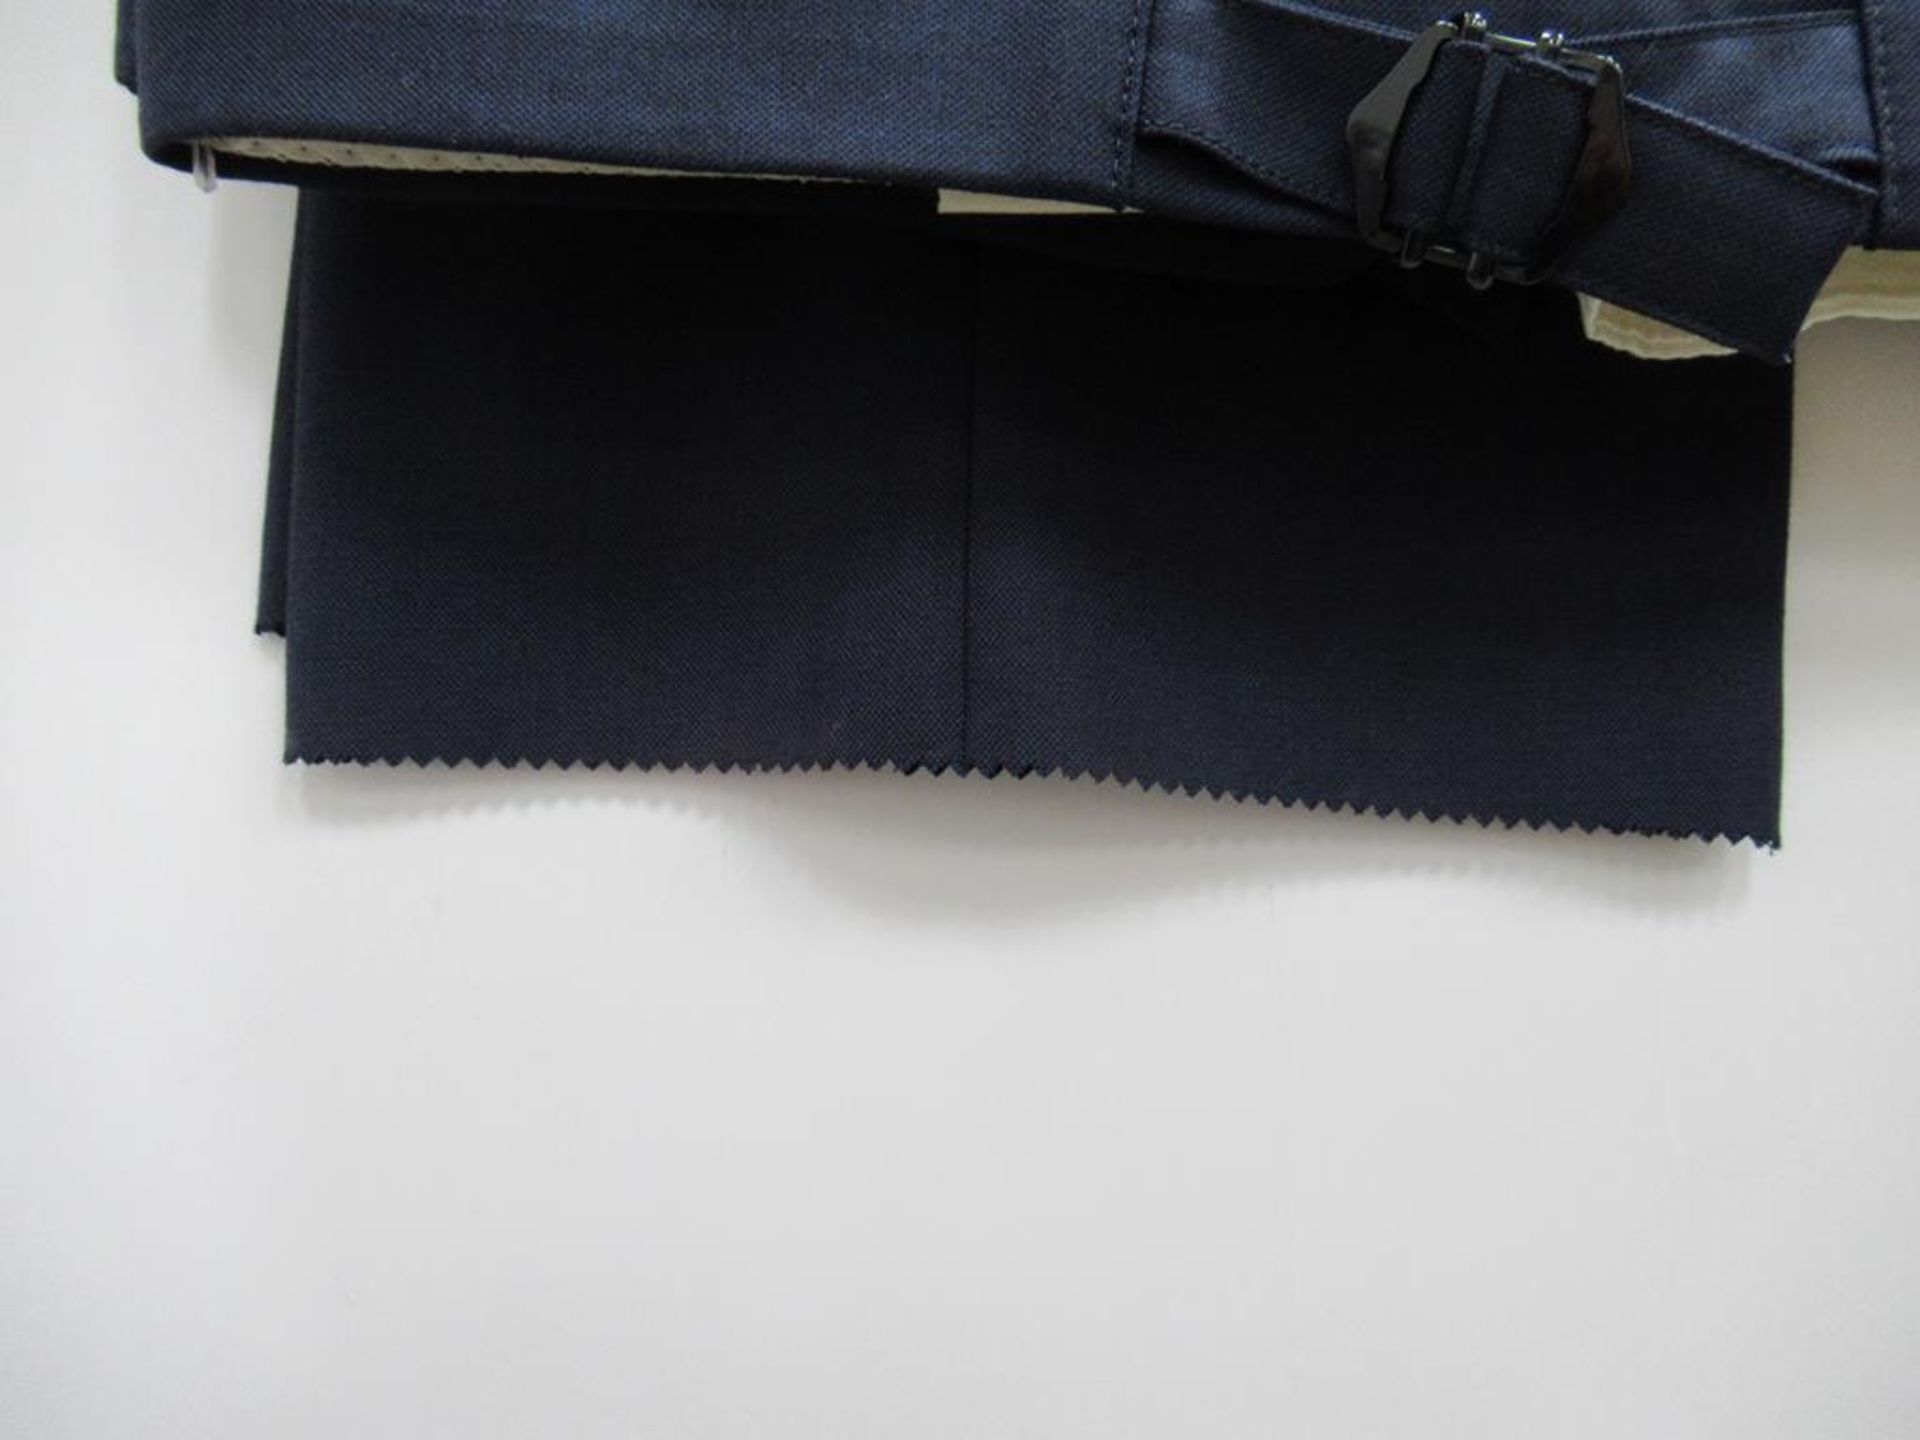 Reverse pleat trousers - Image 3 of 3